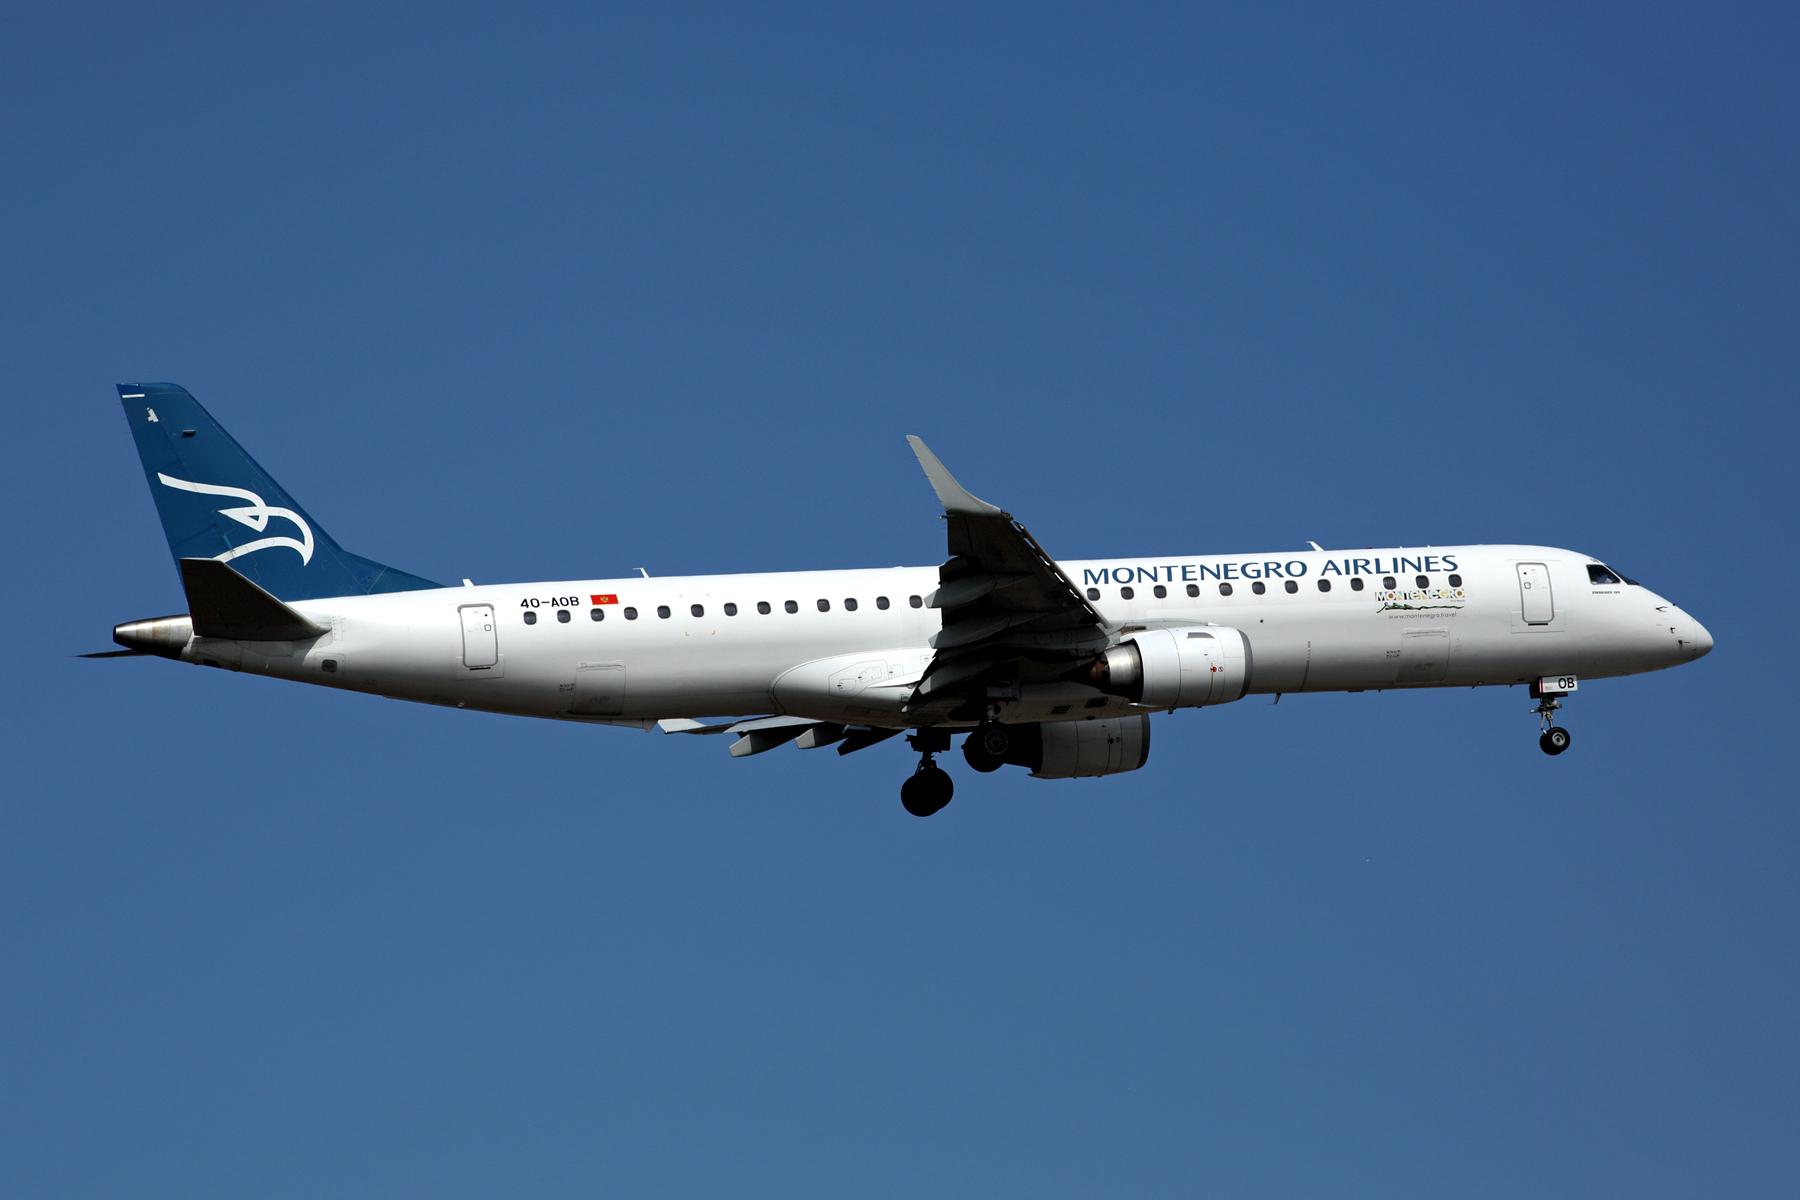 Montenegro Airlines Embraer 190